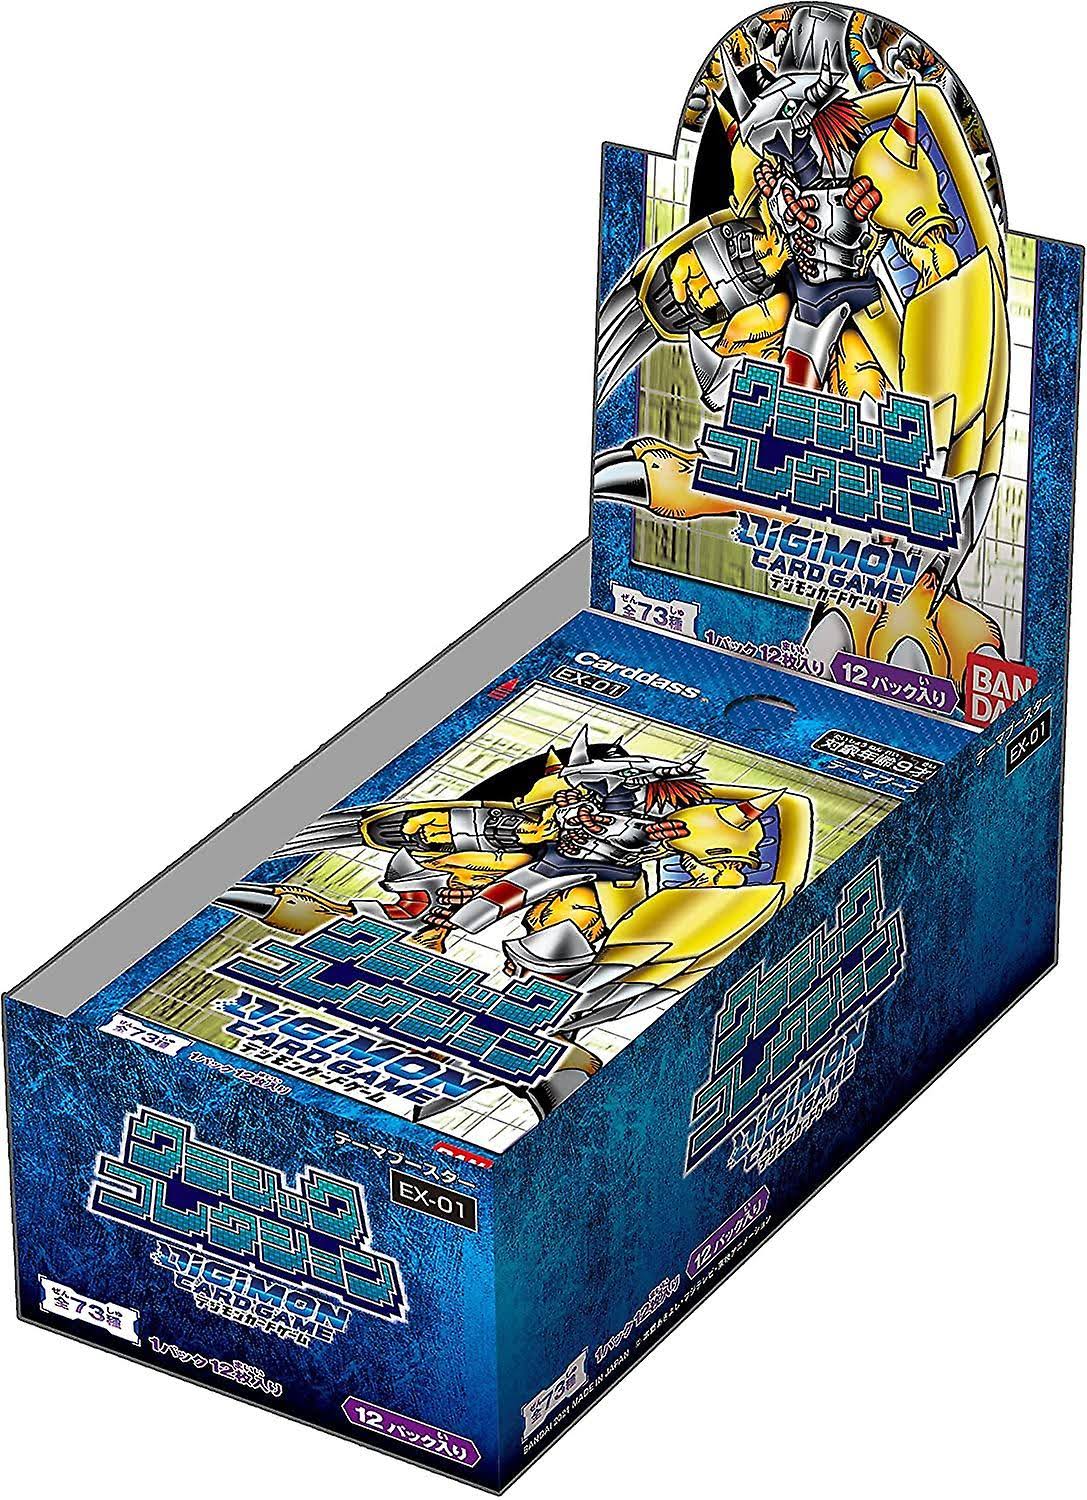 Digimon Card Game - Classic Collection (EX01) Booster Pack